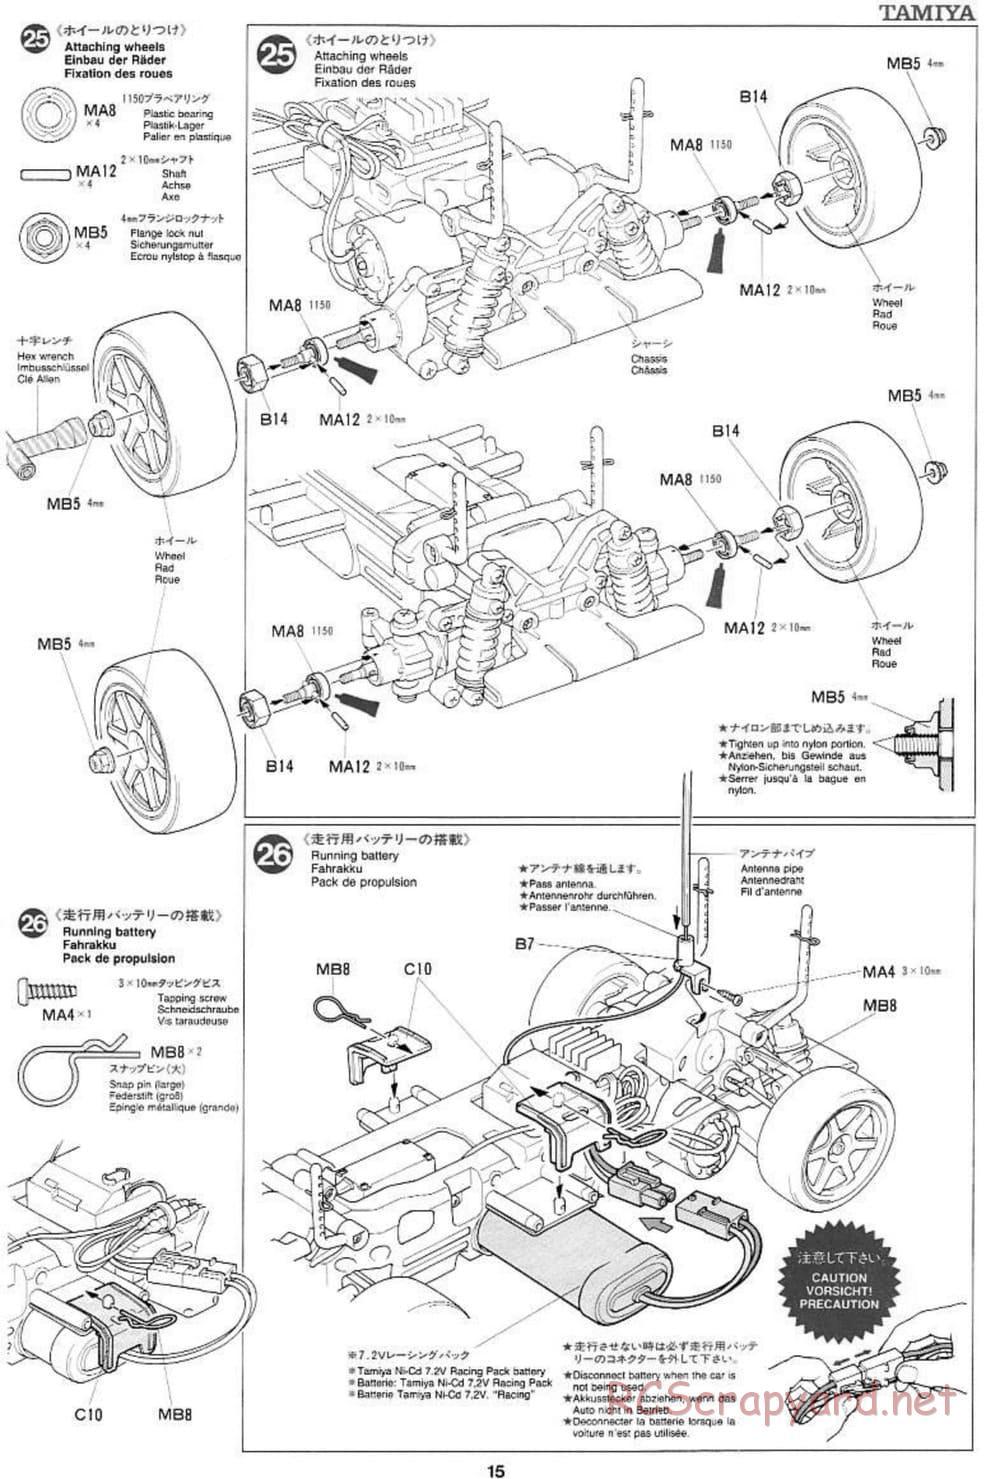 Tamiya - Pennzoil Nismo GT-R - TL-01 Chassis - Manual - Page 15